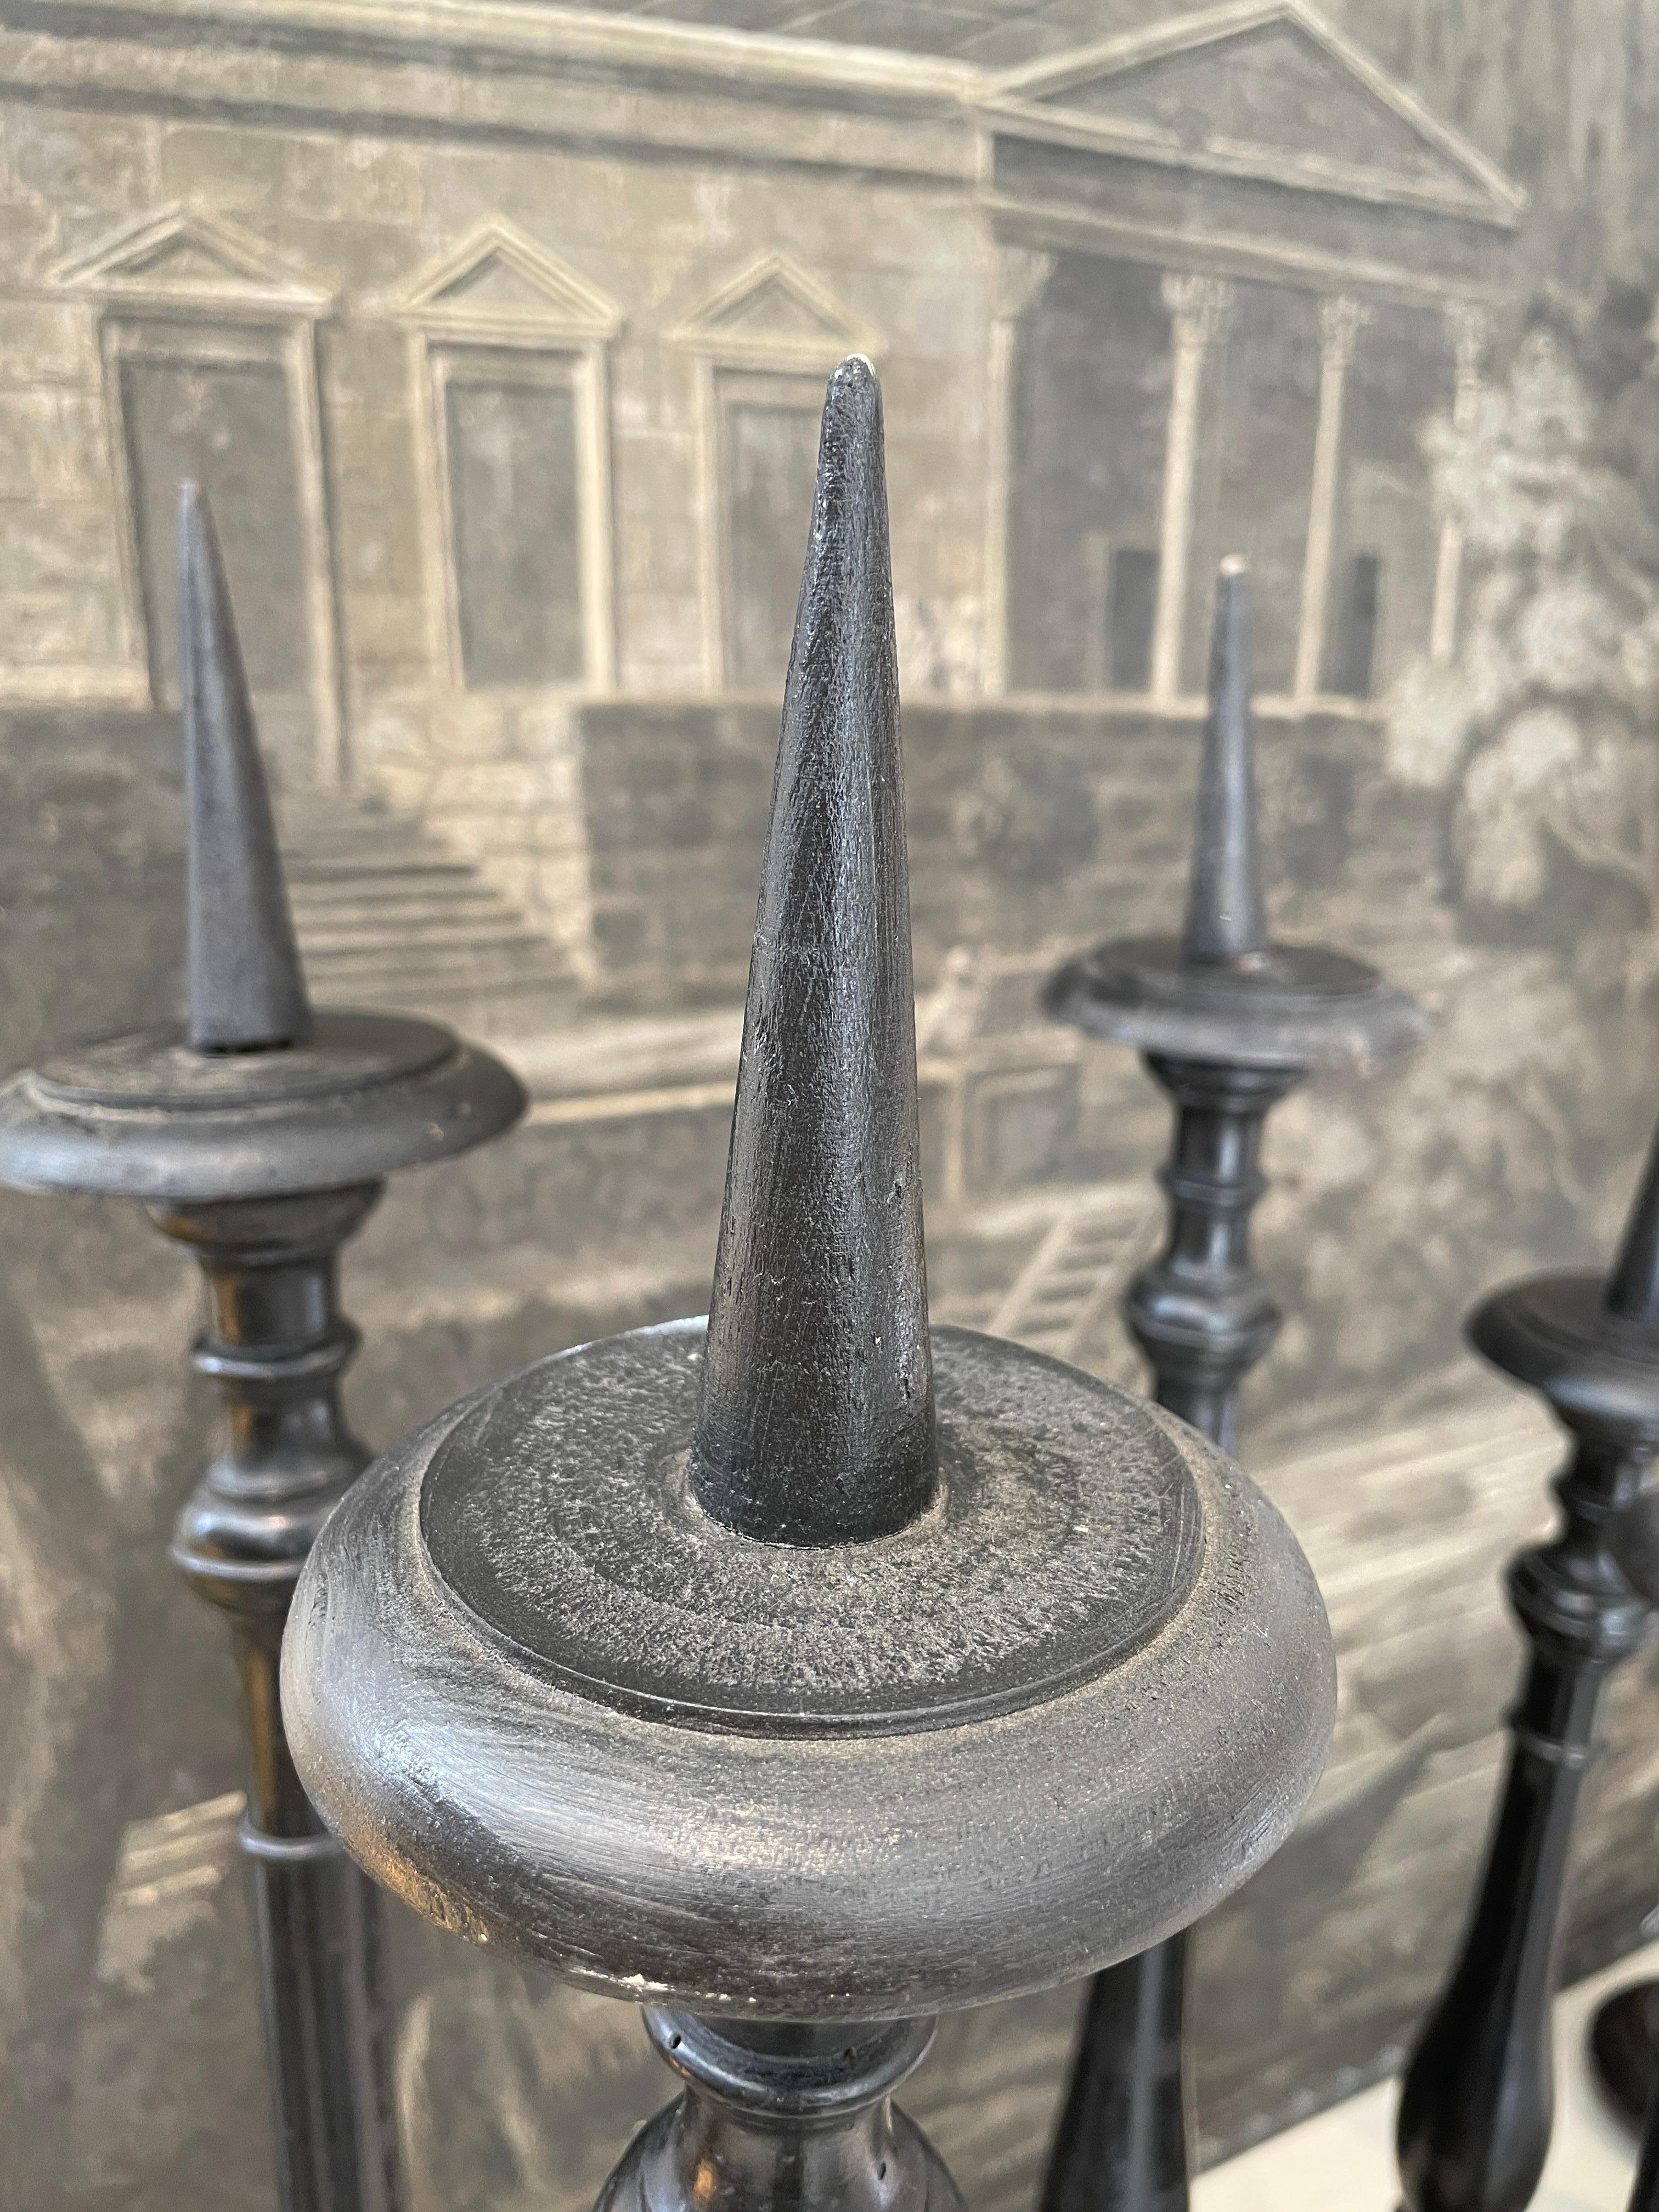 Majestic solid black candlesticks in various sizes. A cluster of three makes a perfect grouping.